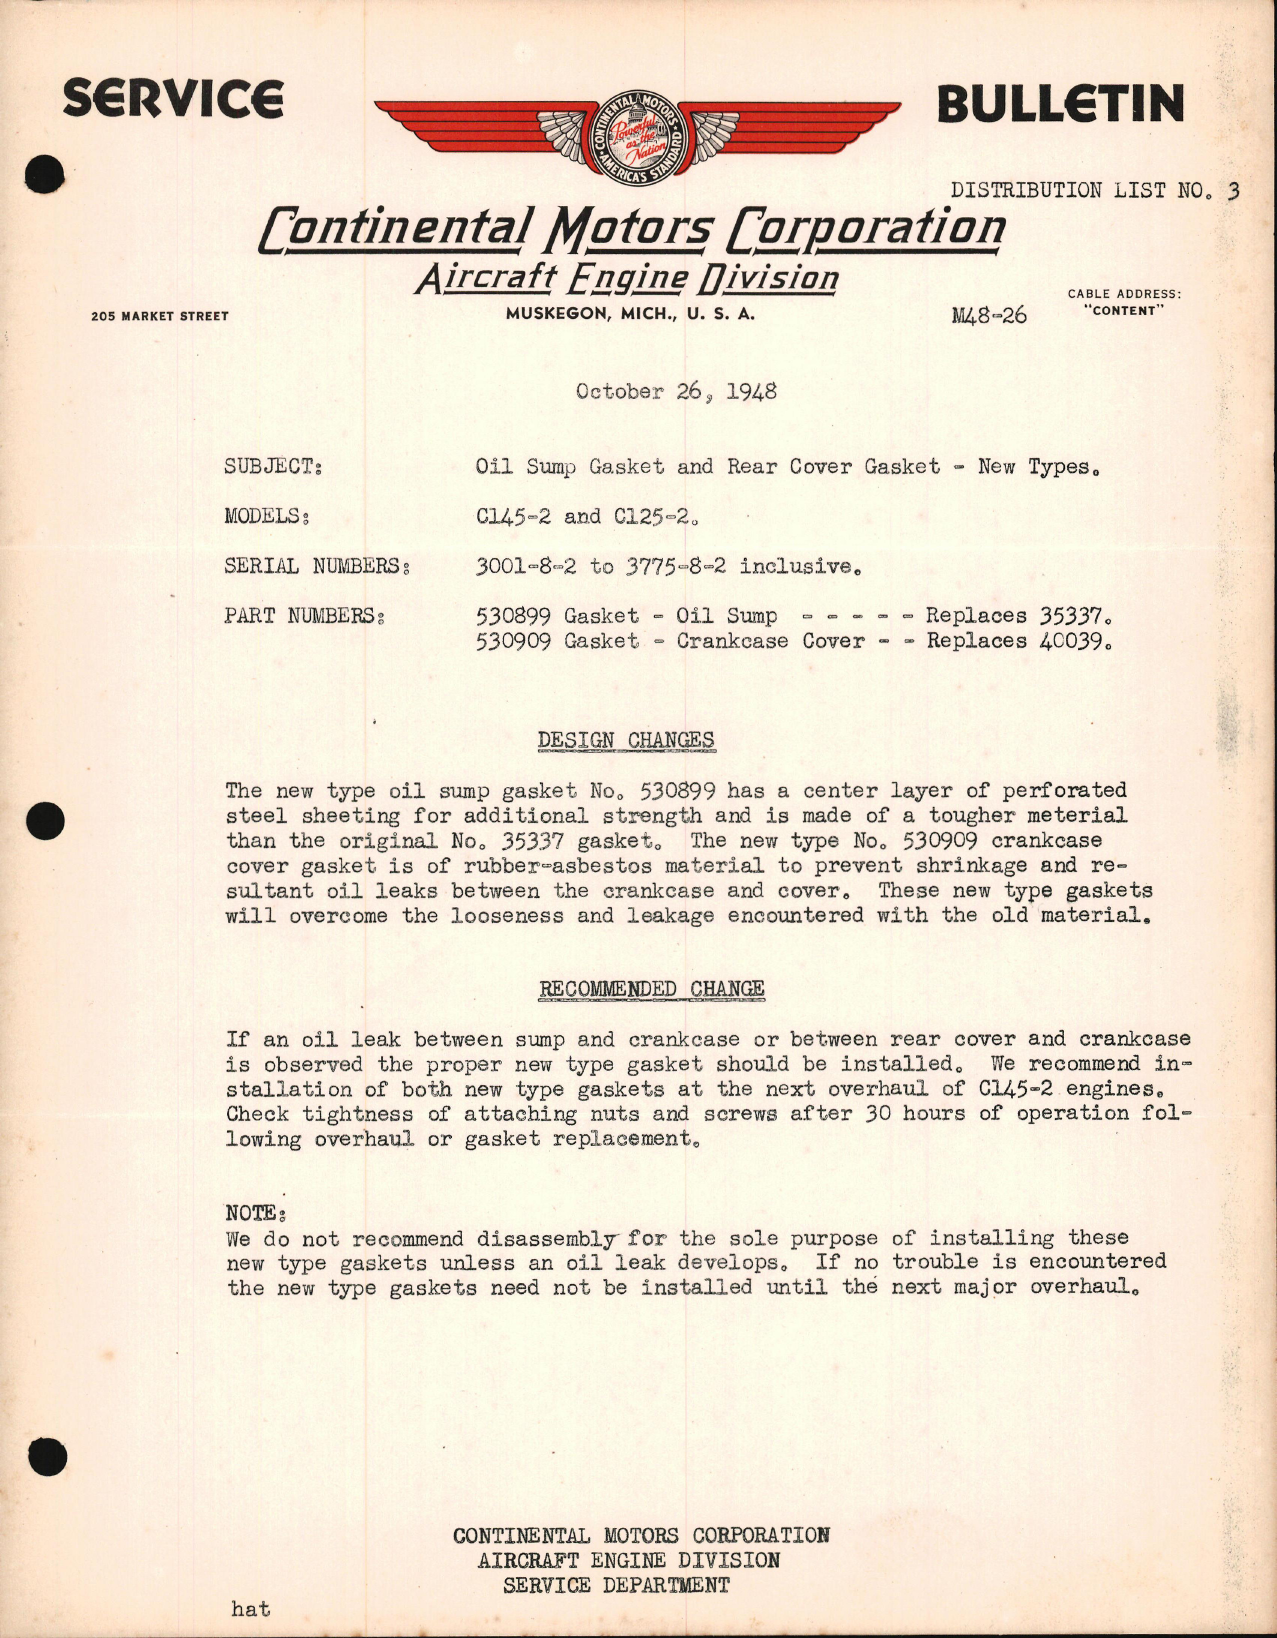 Sample page 1 from AirCorps Library document: Oil Sump Gasket & Rear Cover Gasket - New Types